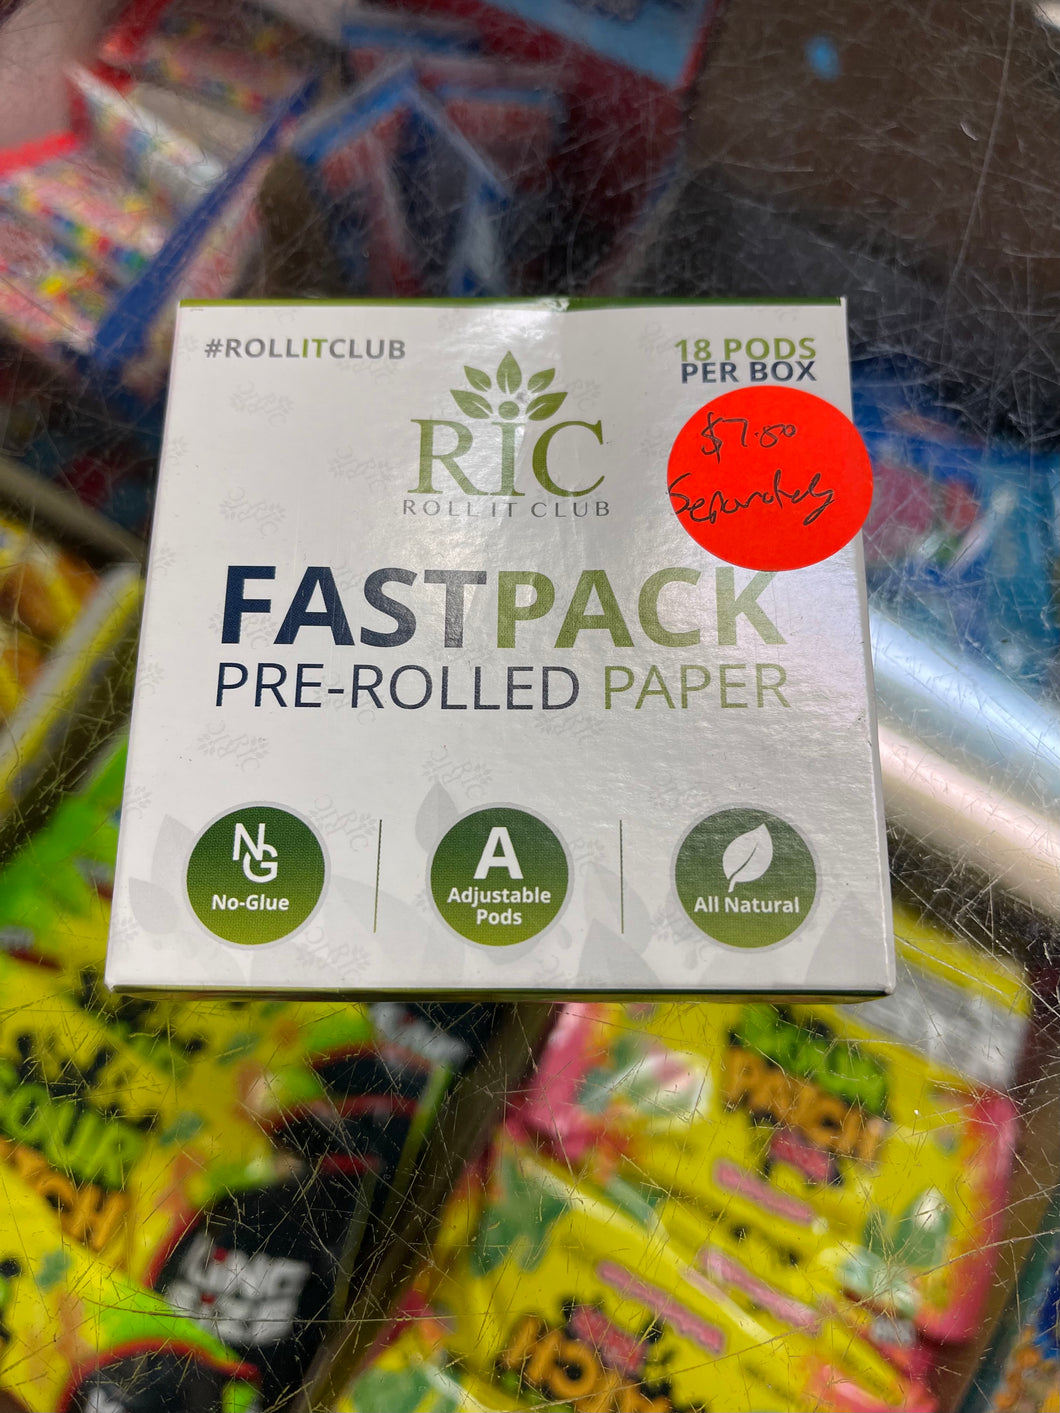 Fastpack pre rolled papers